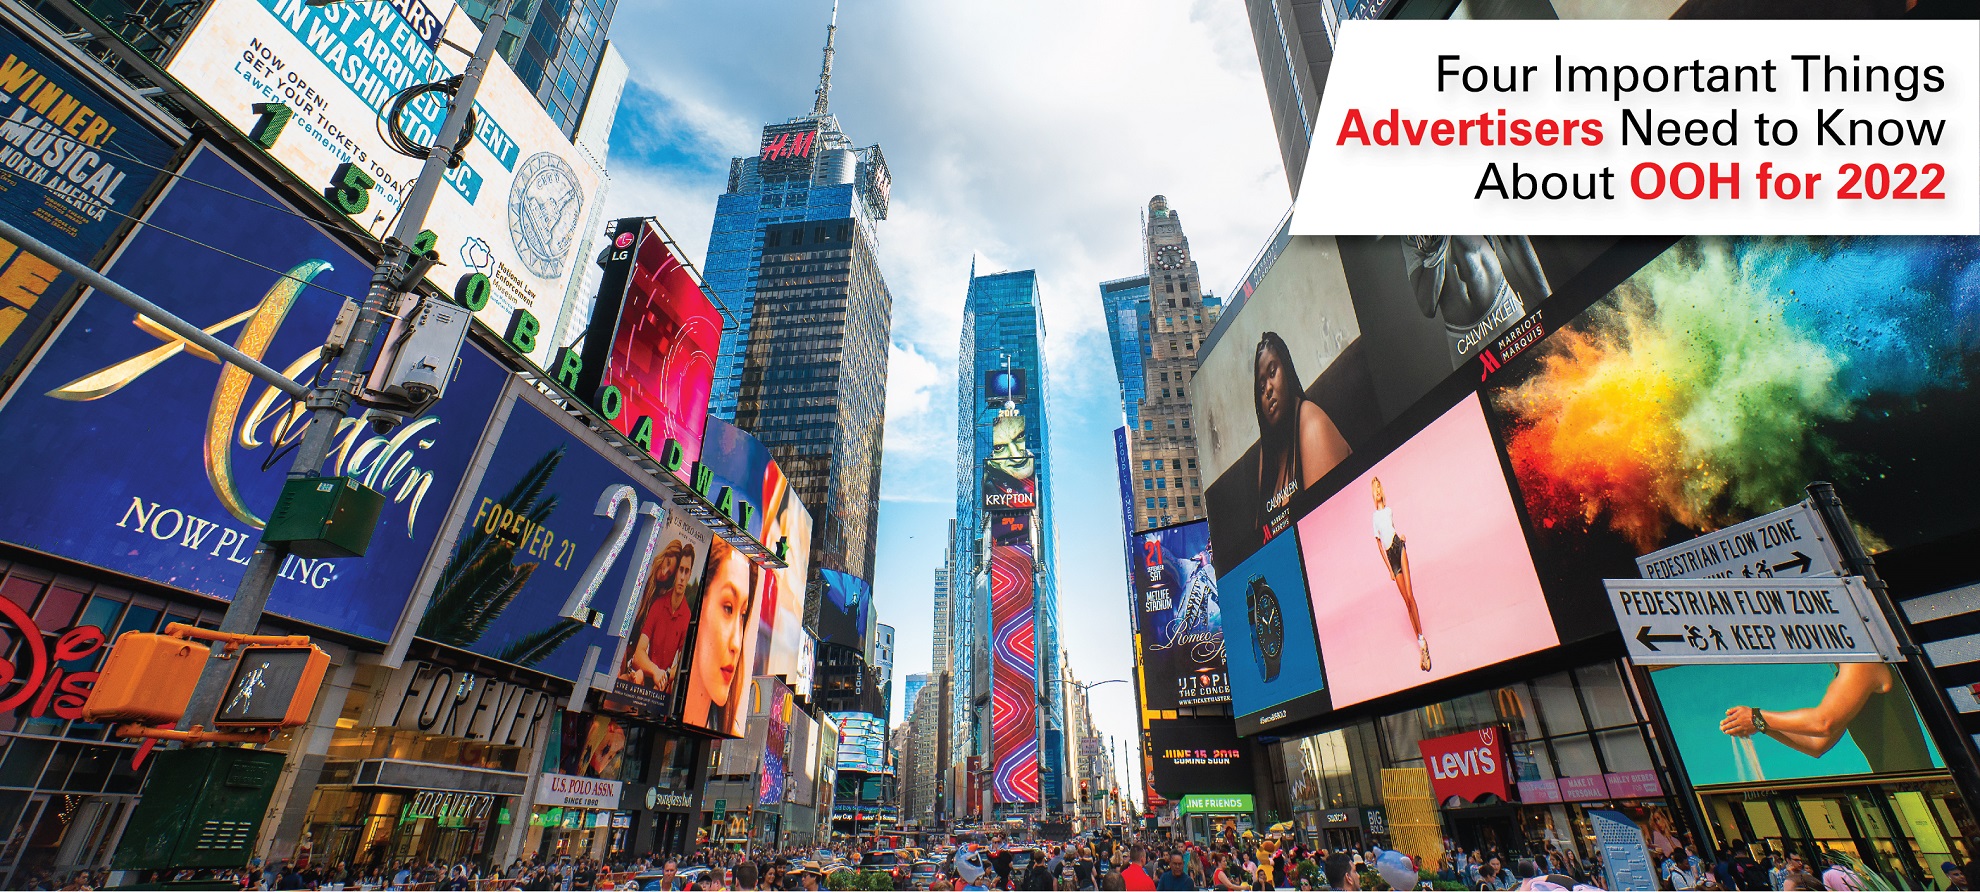 Four Important Things Advertisers Need to Know About OOH for 2022